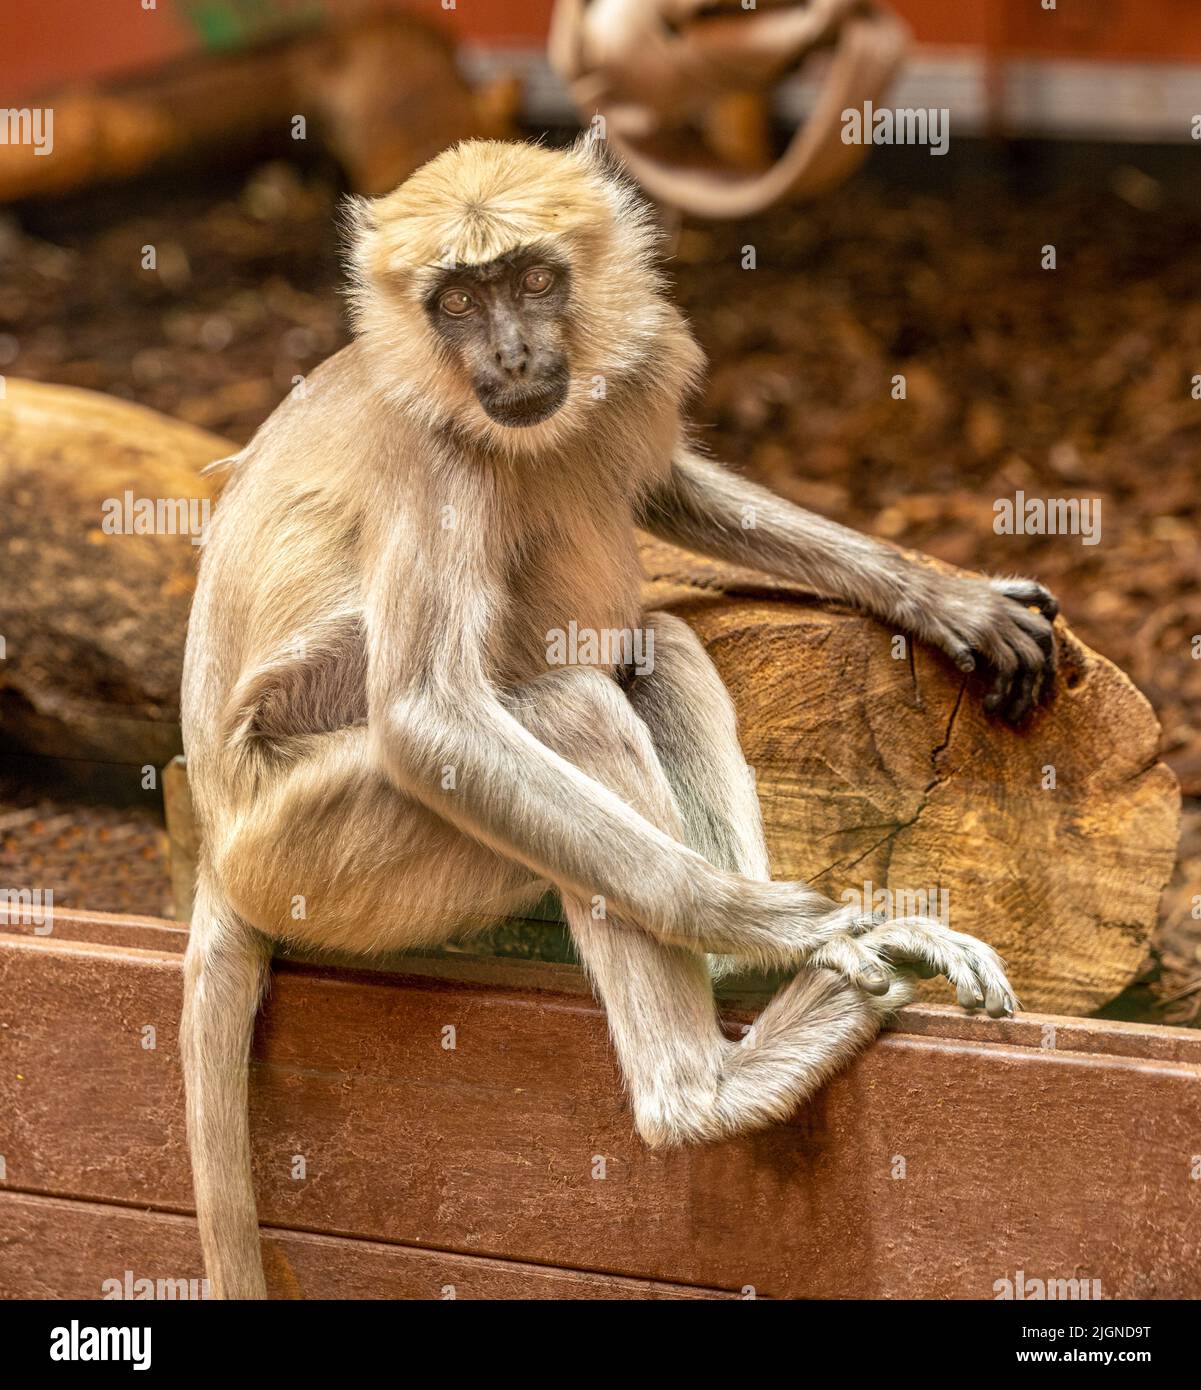 Gray langurs or Hanuman langurs, the most widespread langurs of South Asia, are a group of Old World monkeys constituting the entirety of the genus Se Stock Photo